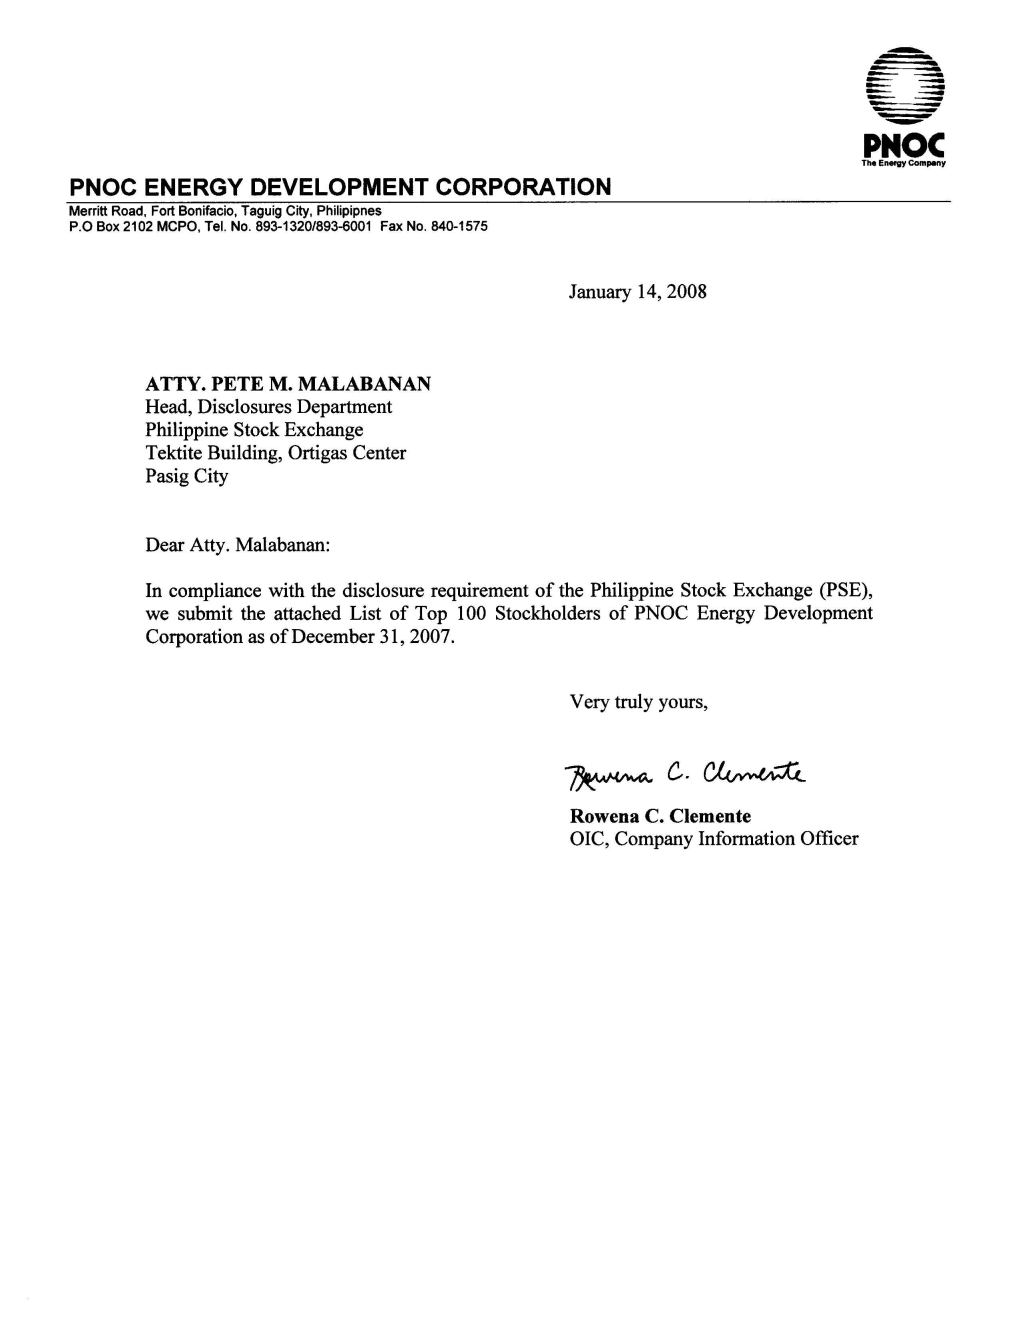 PNOC ENERGY DEVELOPMENT CORP. List of Top 100 Stockholders As of December 31, 2007